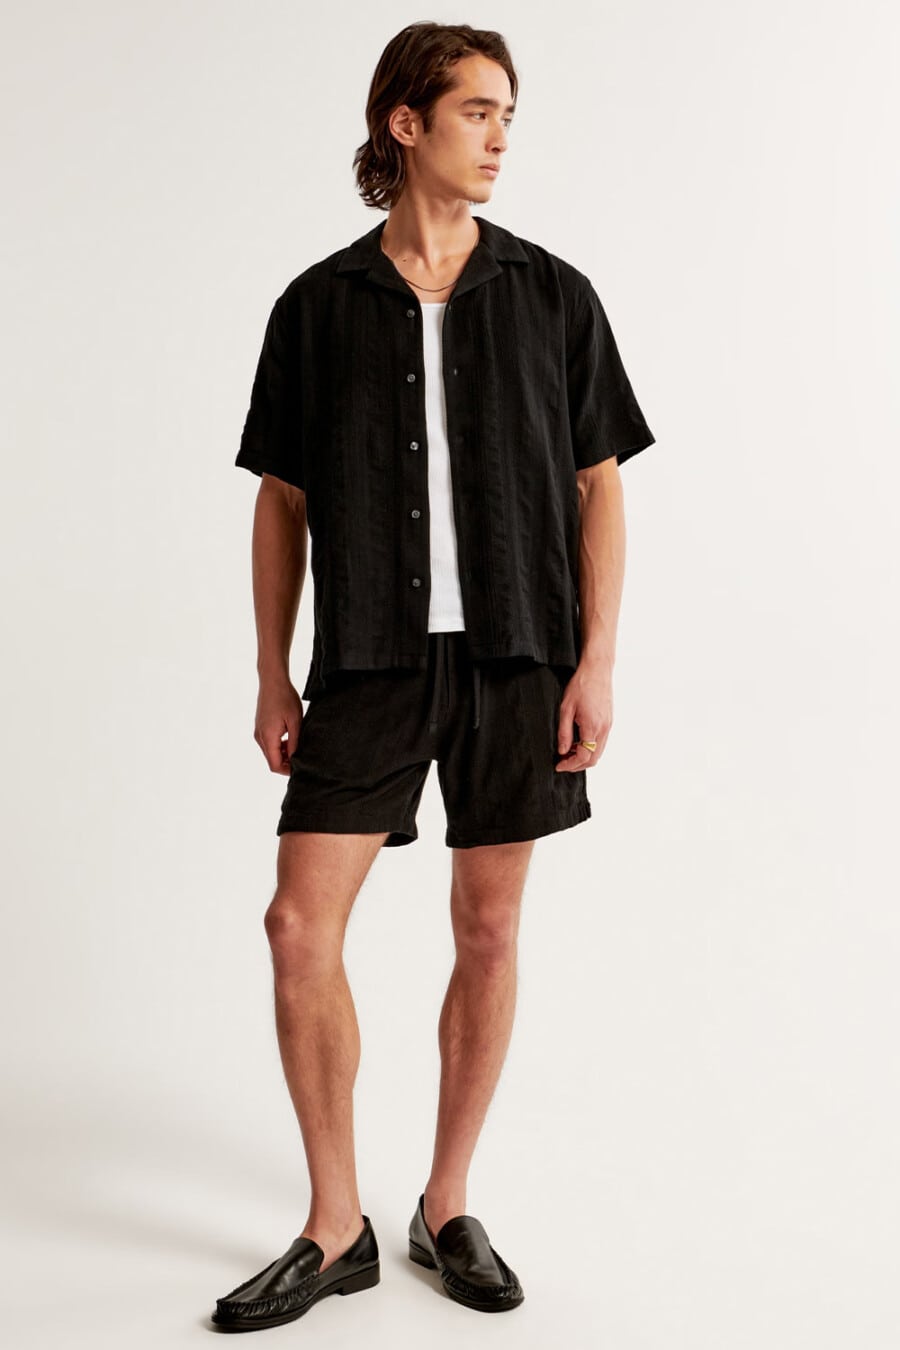 Men's black shorts, black short-sleeve shirt, white T-shirt and black leather loafers outfit